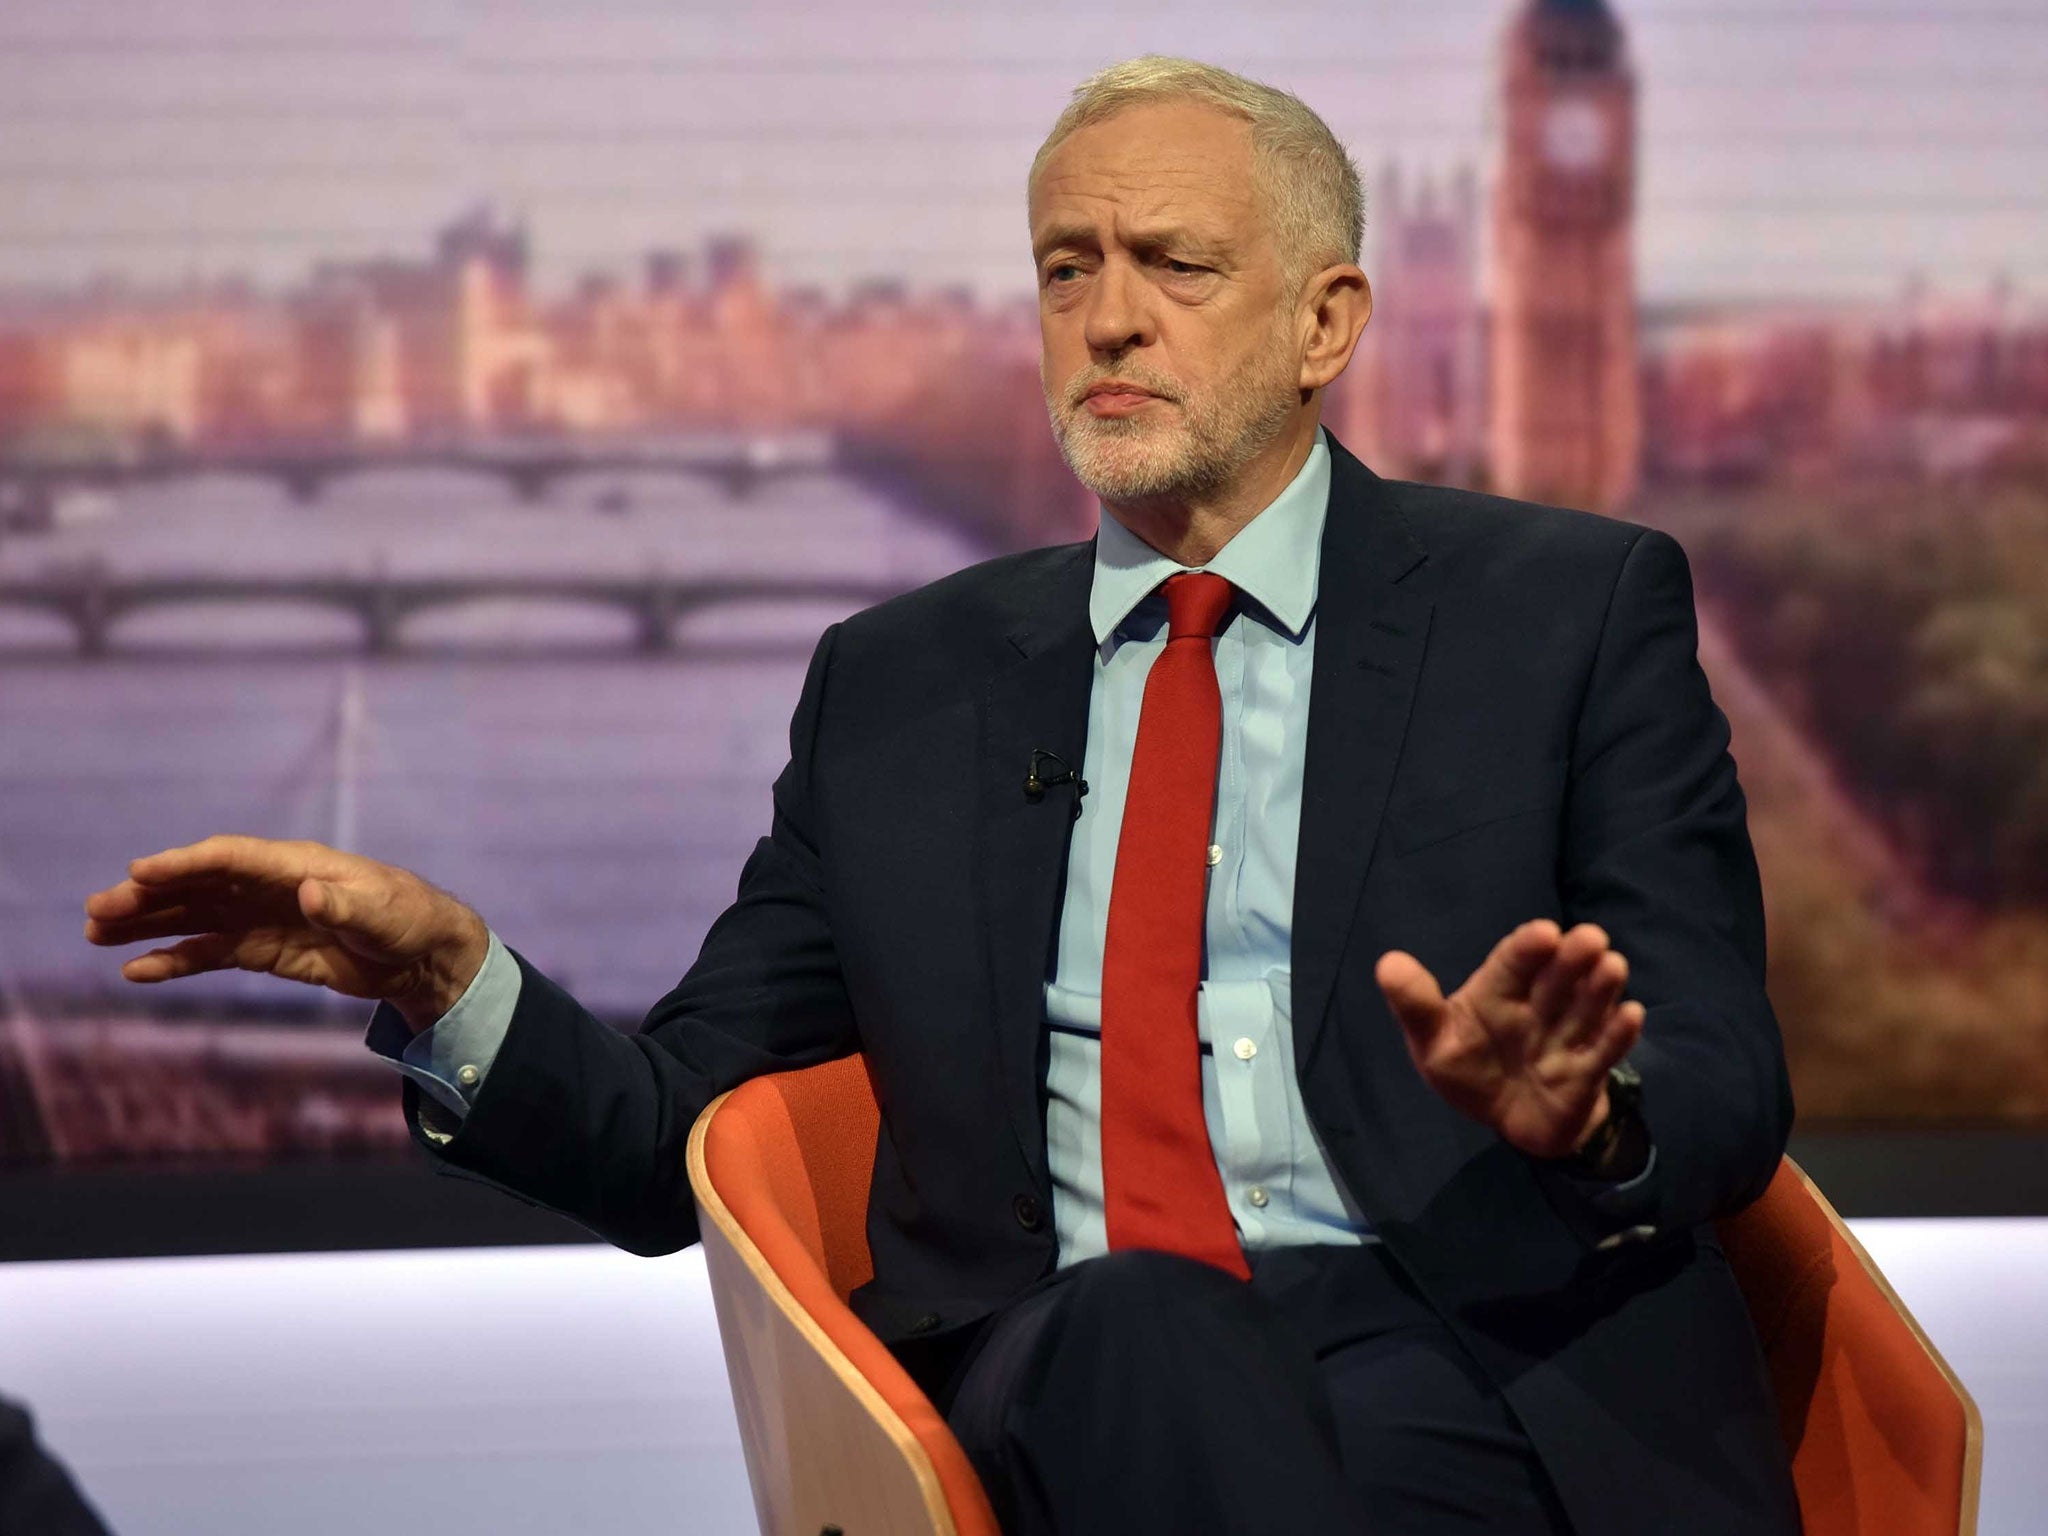 The Labour leader’s appearance on the ‘Andrew Marr Show’ last Sunday made clear his instincts on Brexit